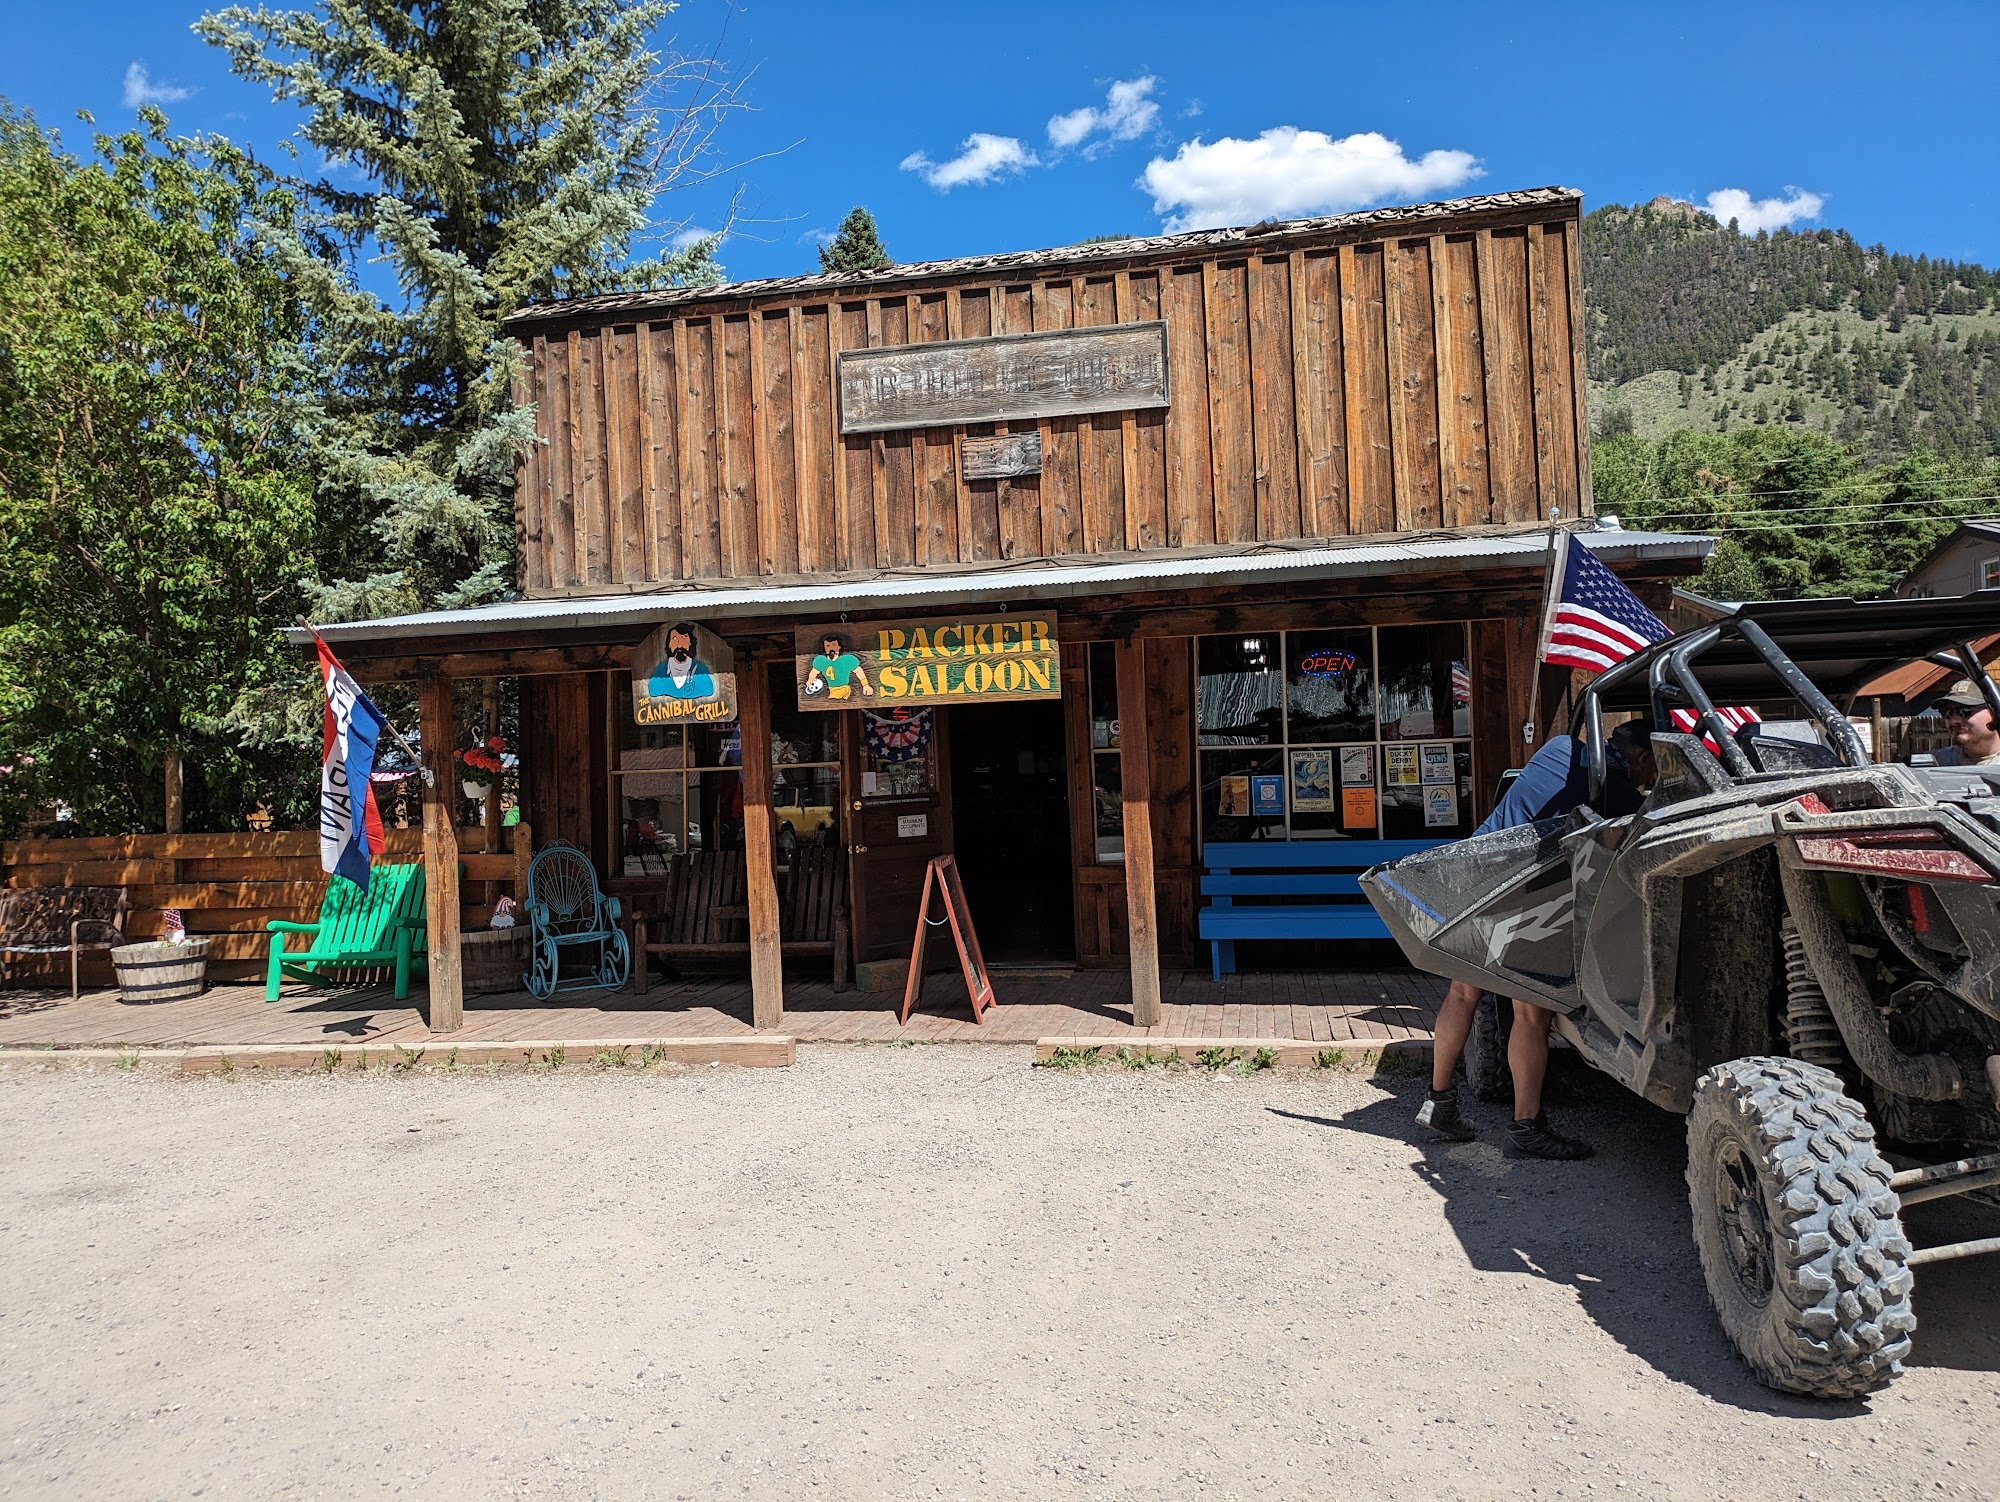 Packer Saloon & Cannibal Grill